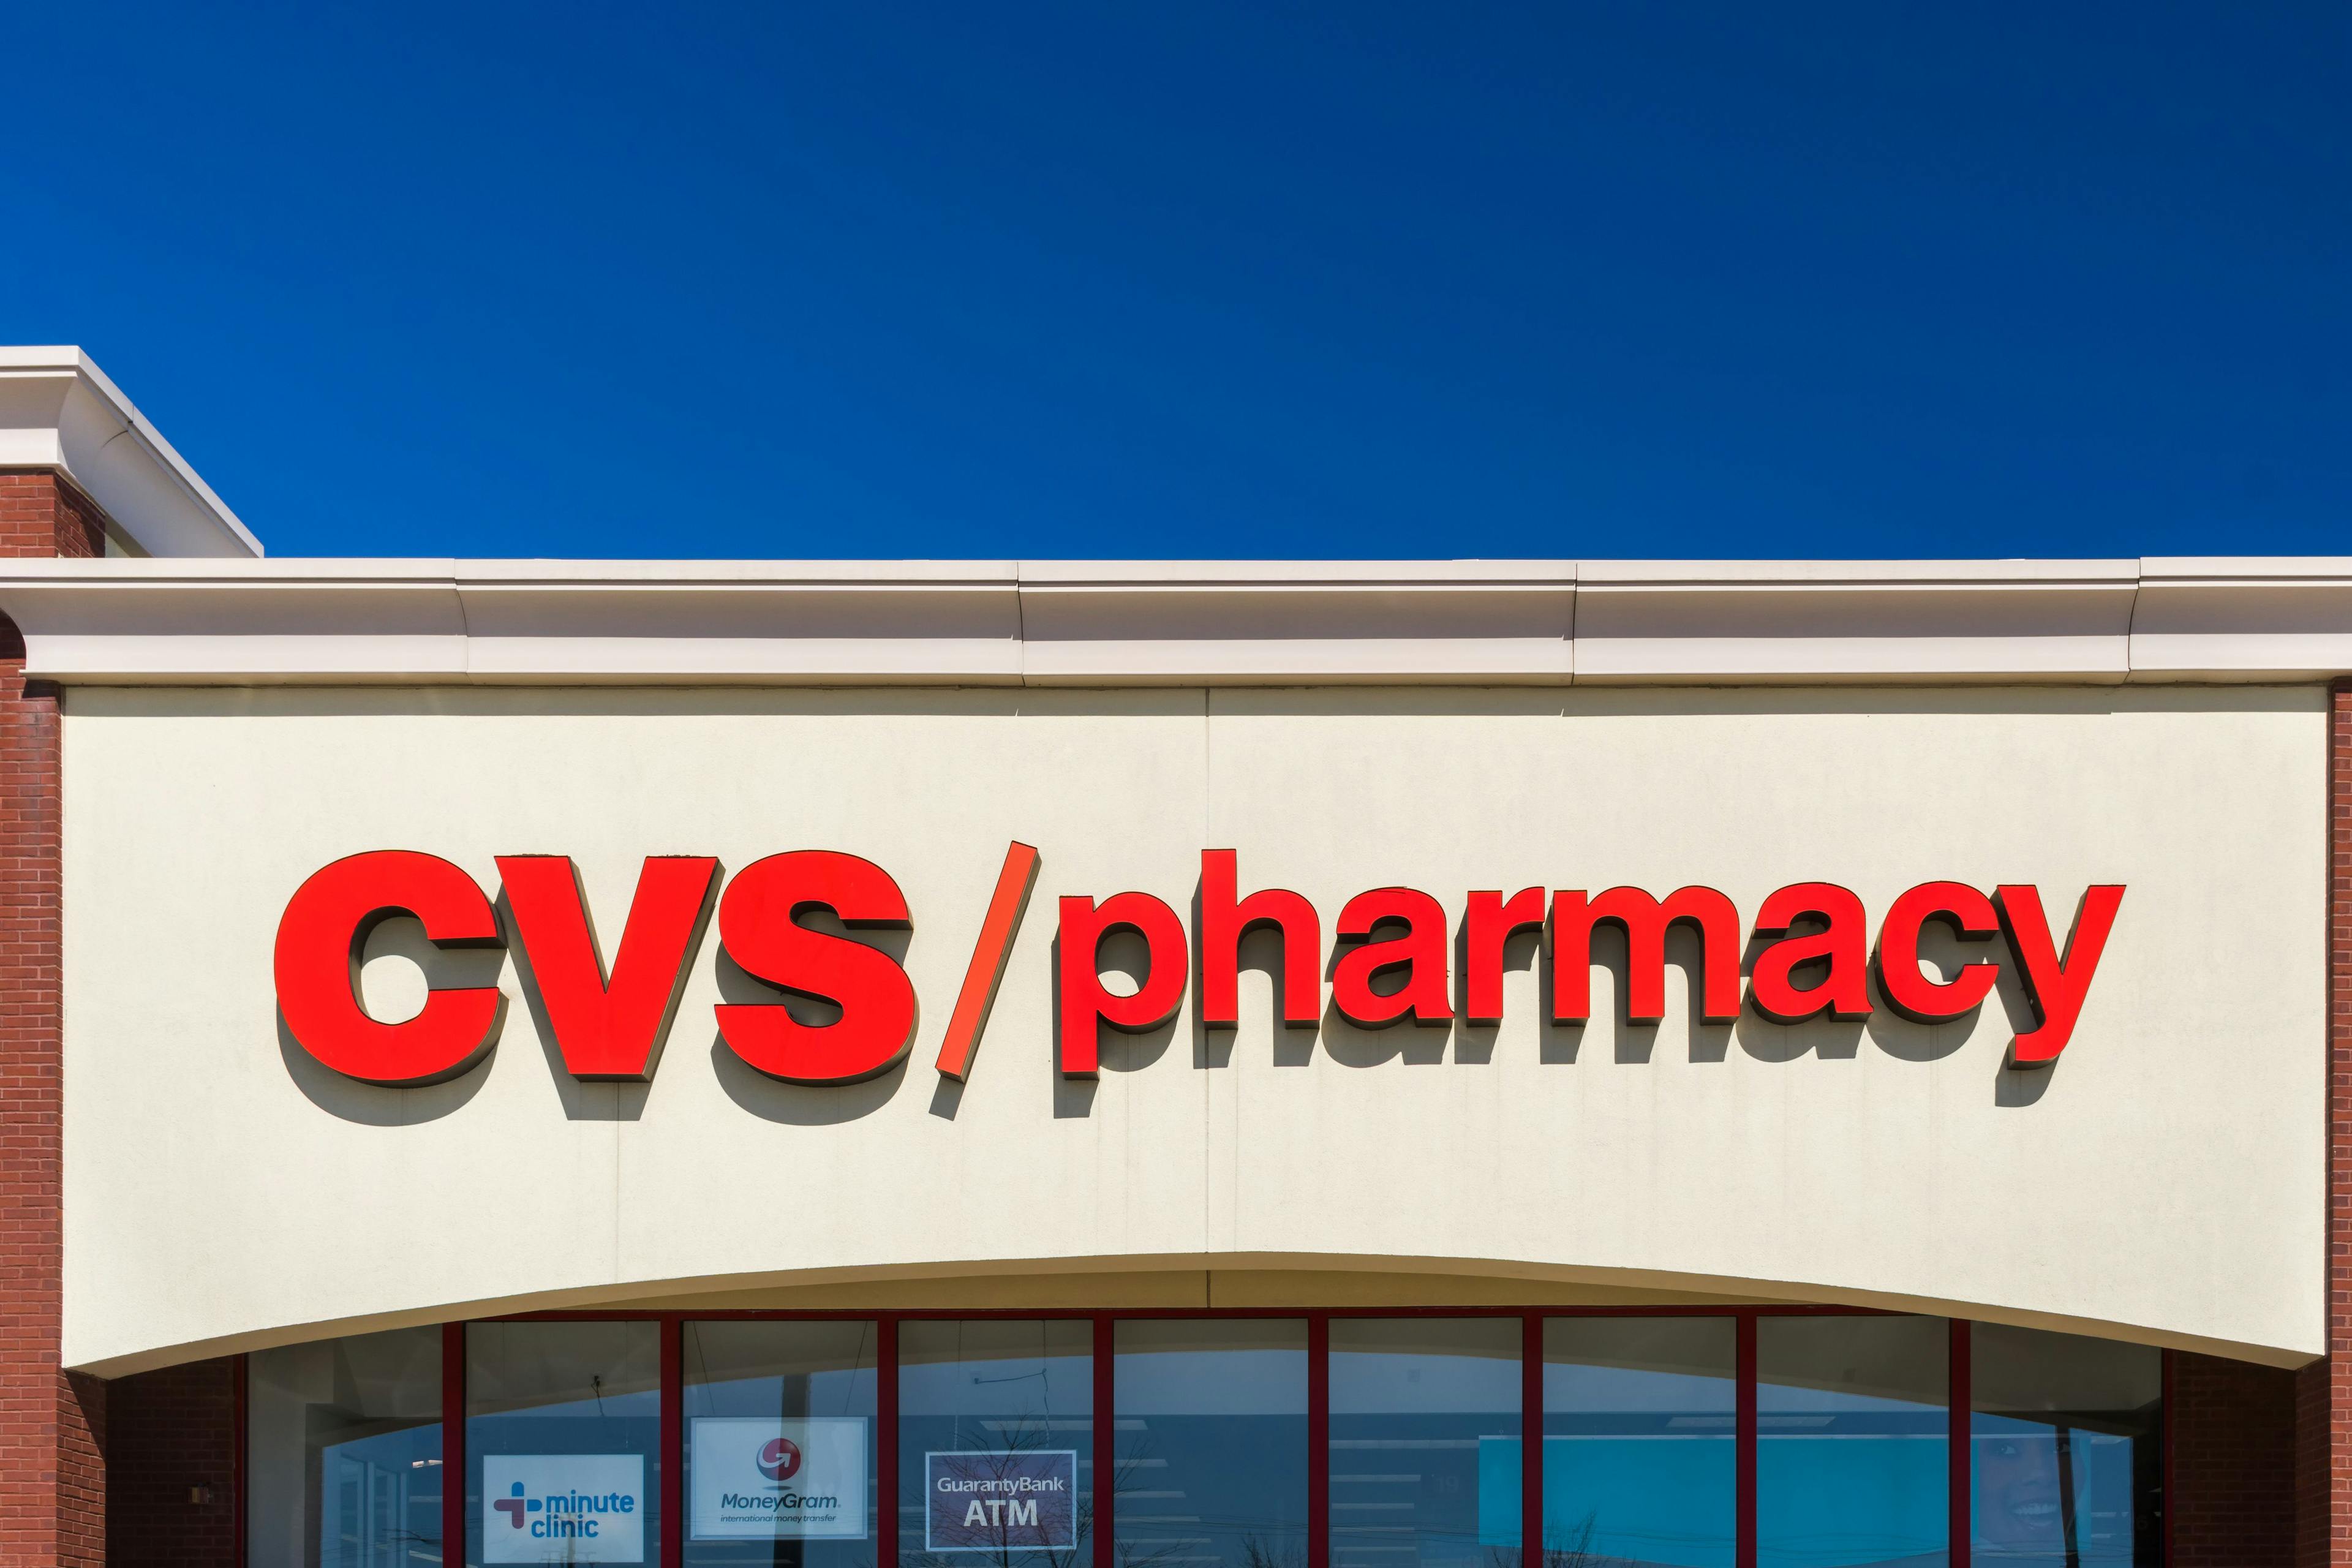 CVS Pharmacists in Rhode Island Petition to Unionize  